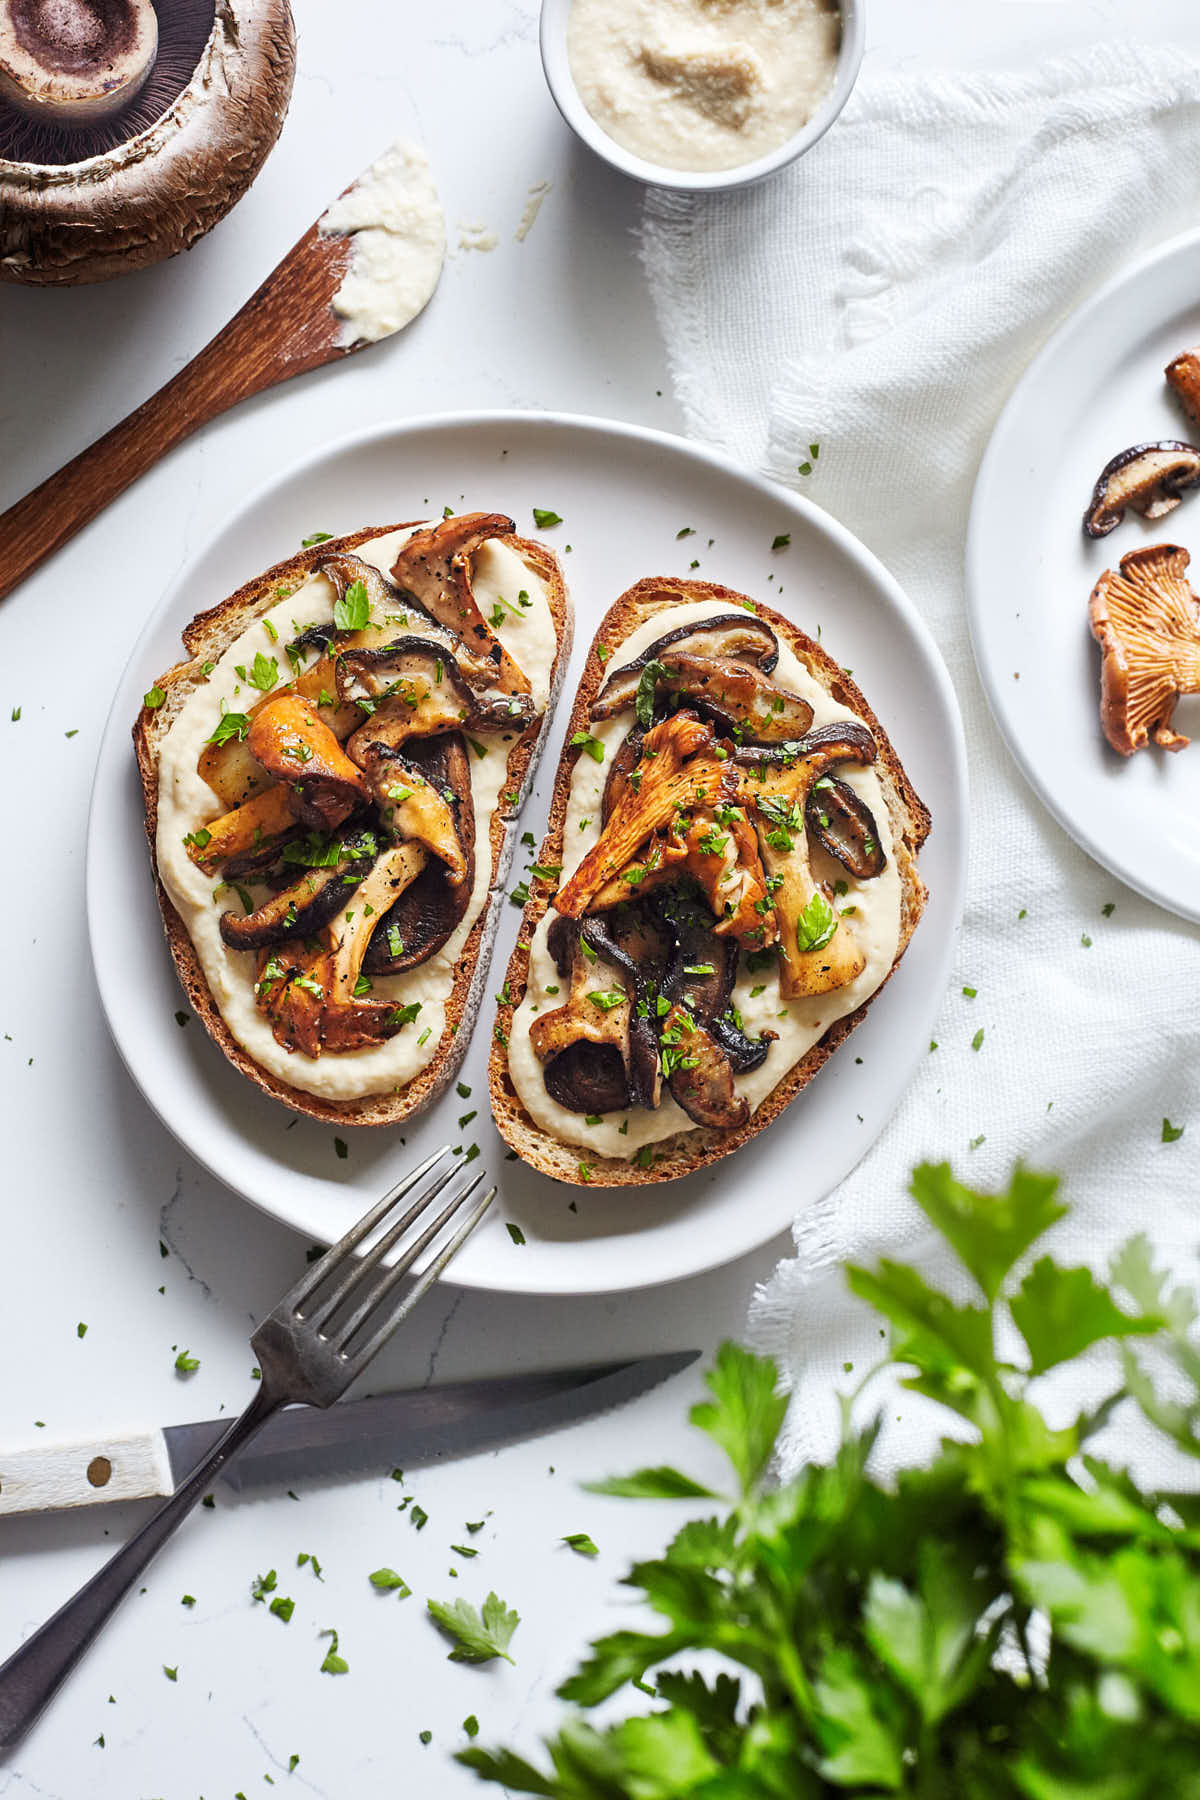 Plate of mushrooms of toast with white bean spread and topped with parsley